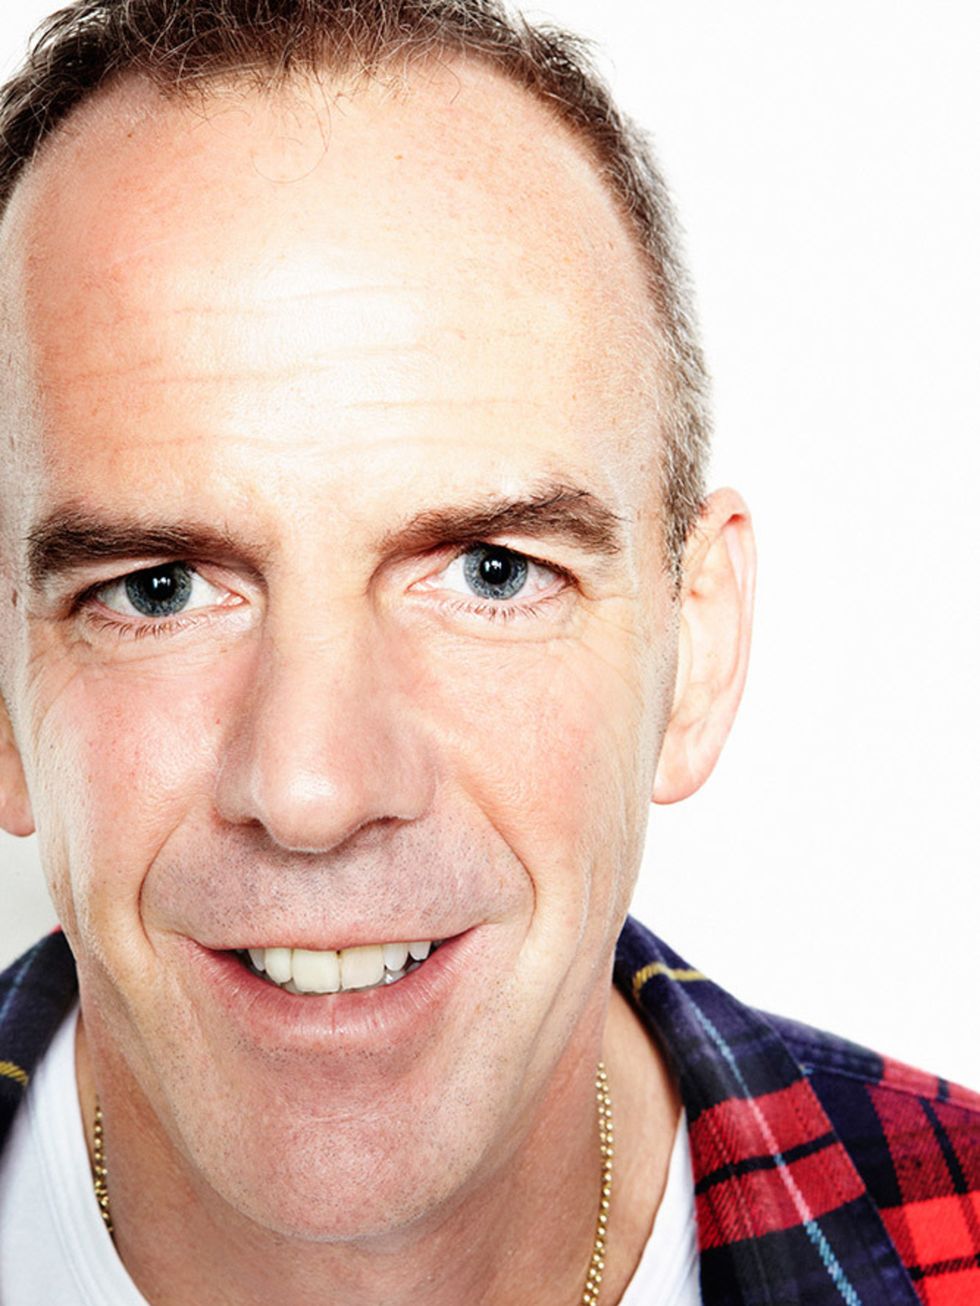 <p><strong>GIG: Fatboy Slim</strong></p>

<p>As a rare treat, Norman Cook aka Fatboy Slim will be returning to the decks and playing a special gig at the O2 Academy Brixton - with guests appearances from DJ Fresh and Slam Dunk&rsquo;d. Outlandish dancing 